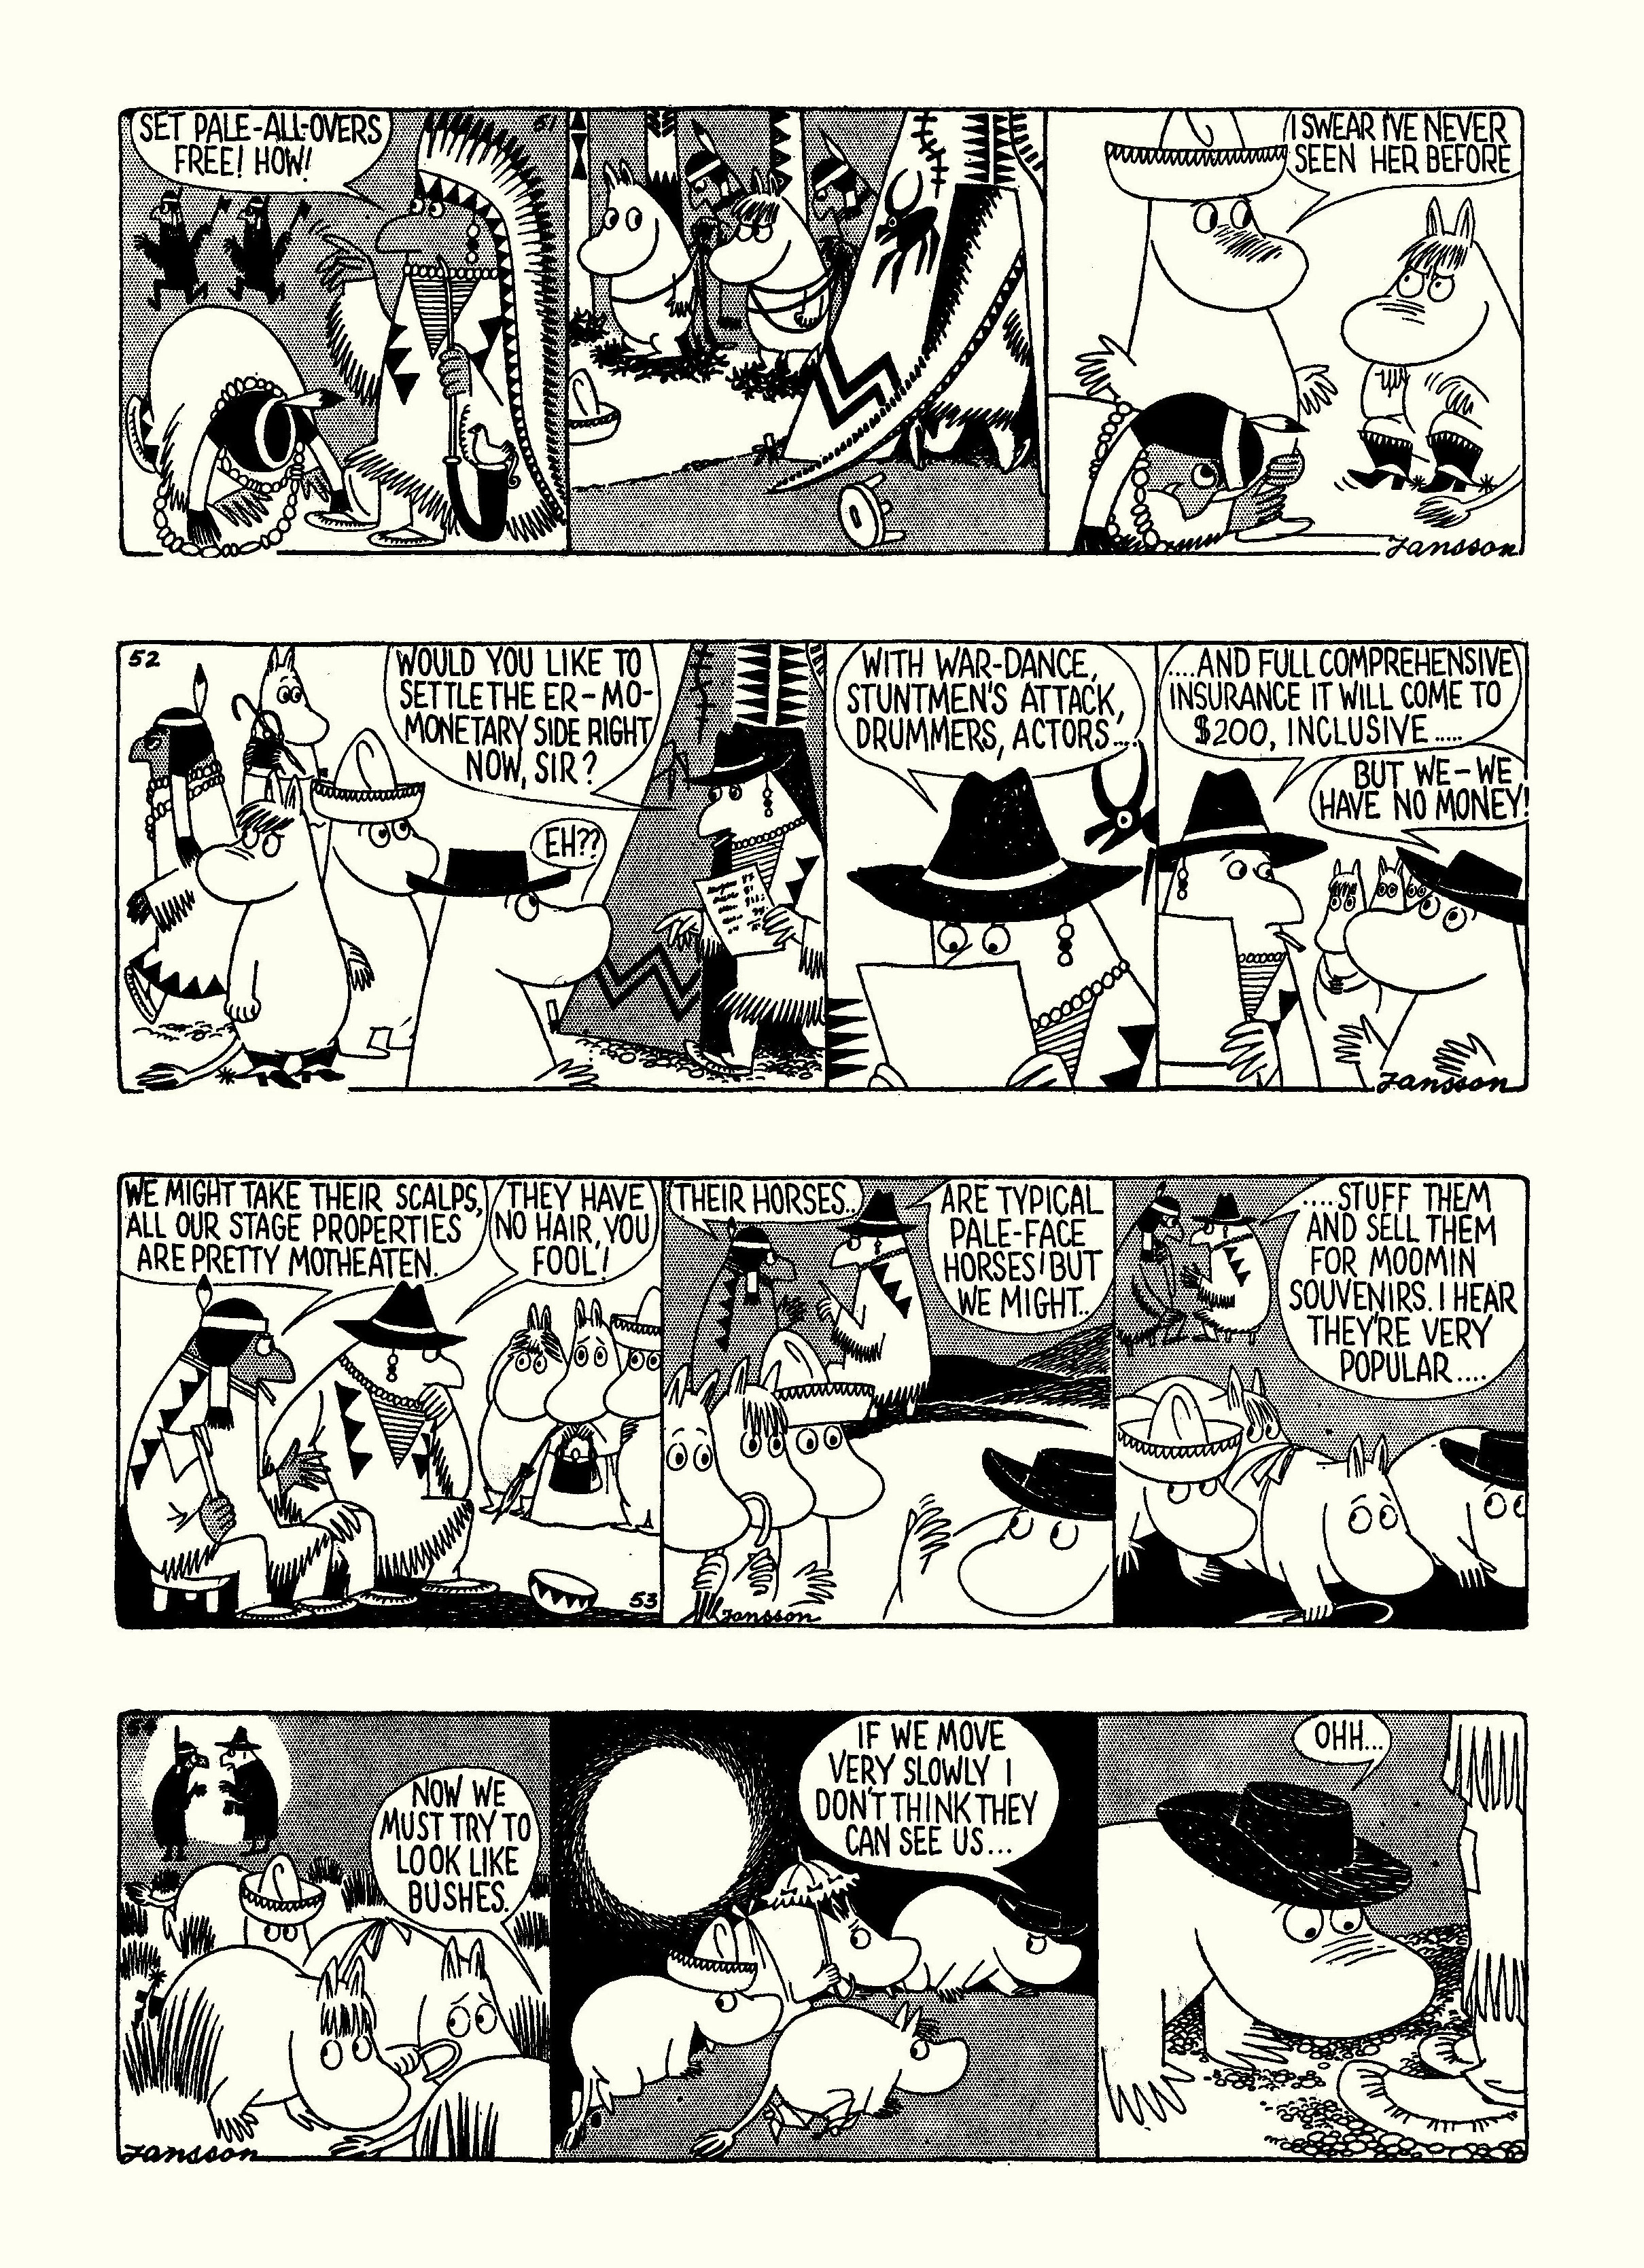 Read online Moomin: The Complete Tove Jansson Comic Strip comic -  Issue # TPB 4 - 19